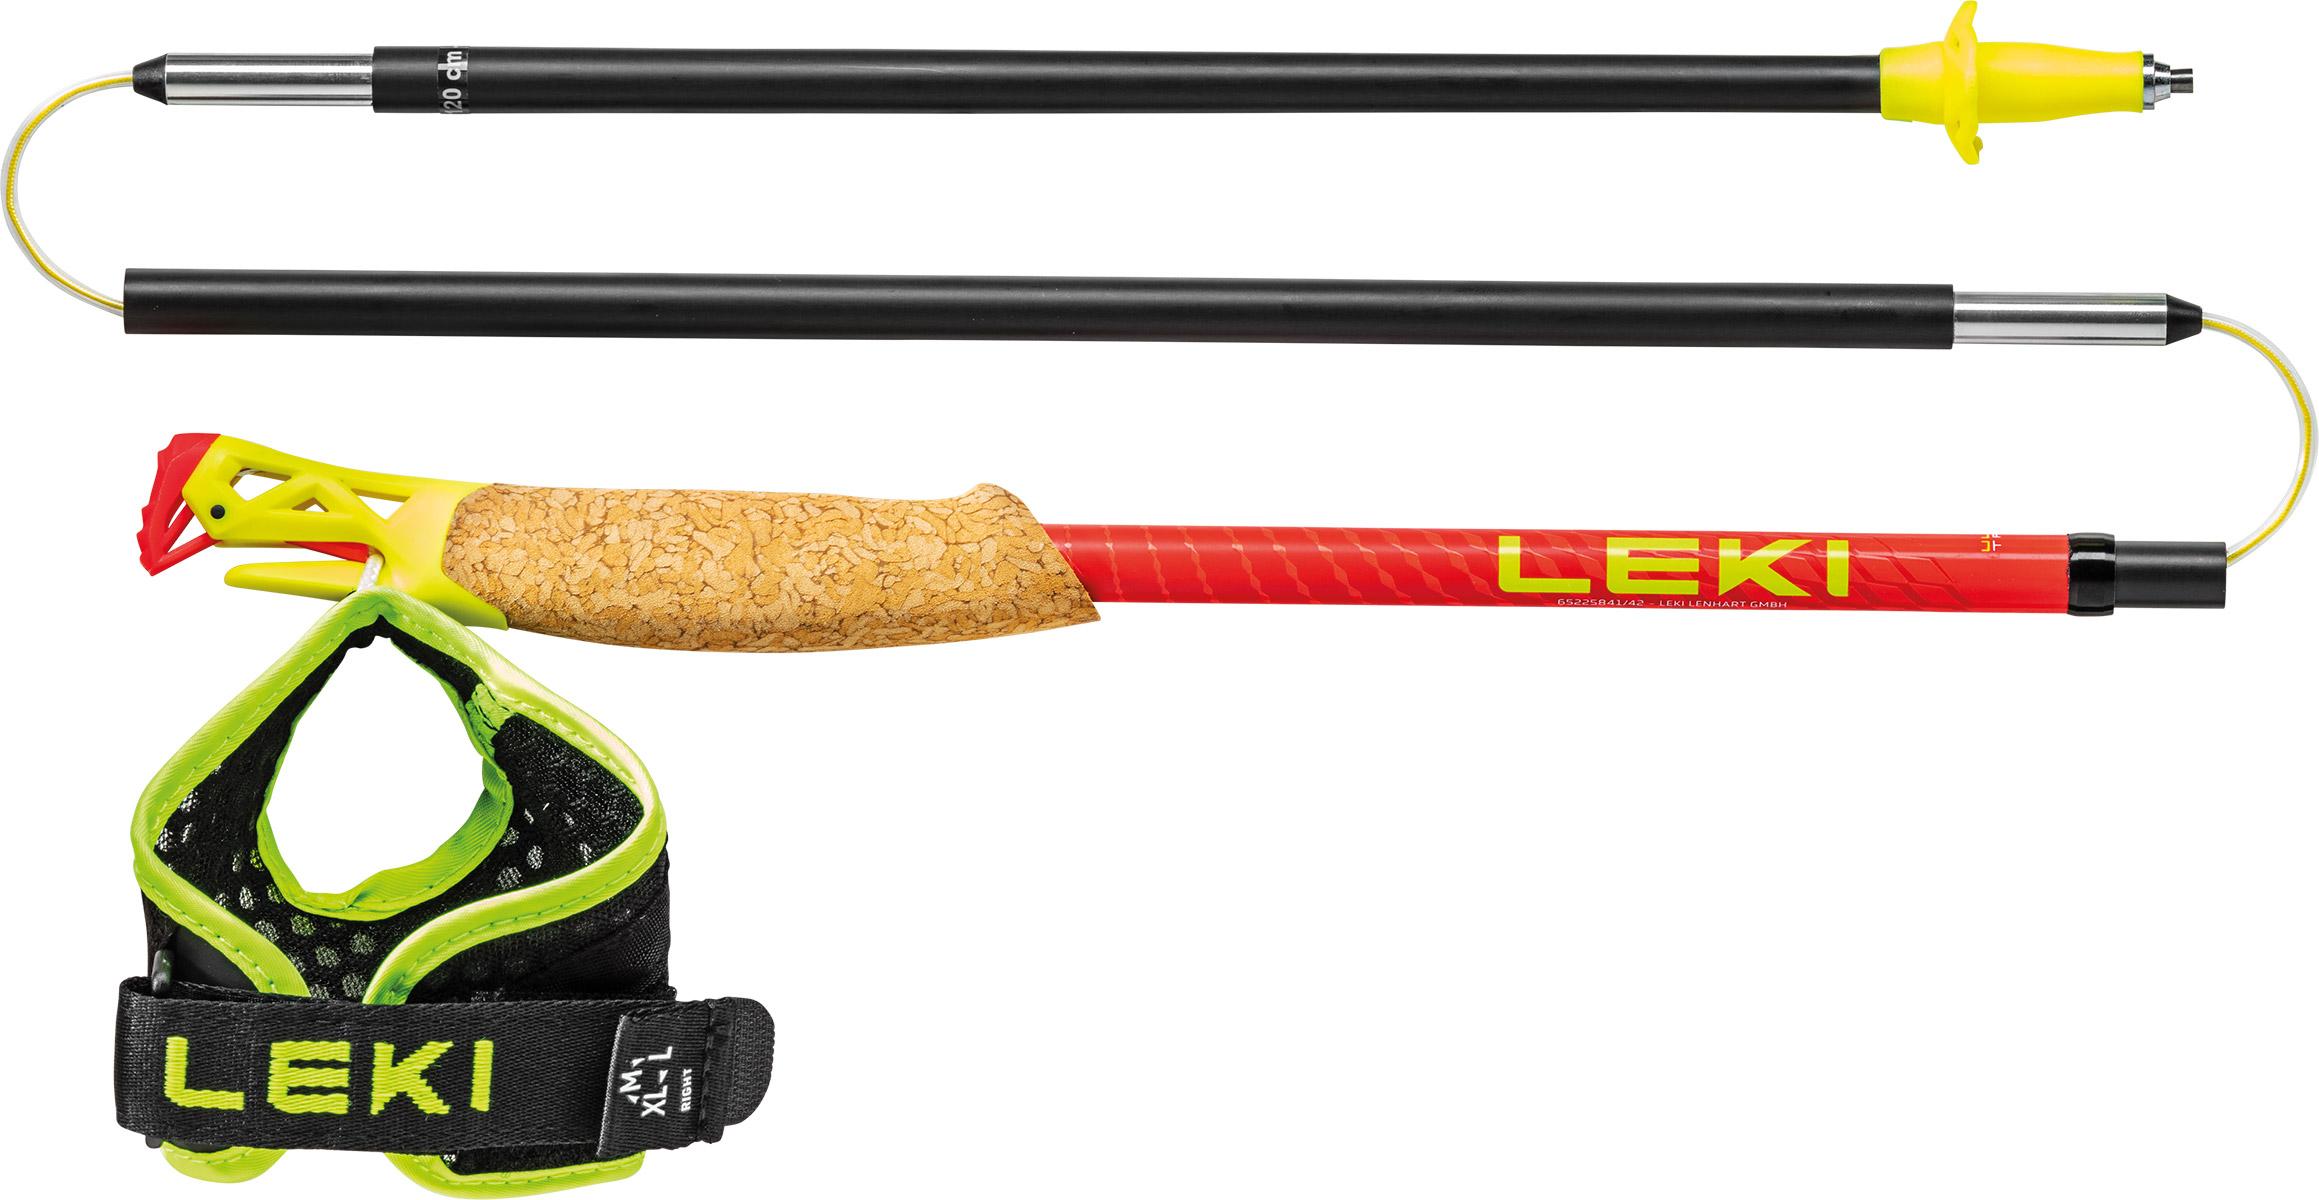 Leki Ultratrail Fx.one Superlite Running Poles - Bright Red/neon Yellow/natural Carbon